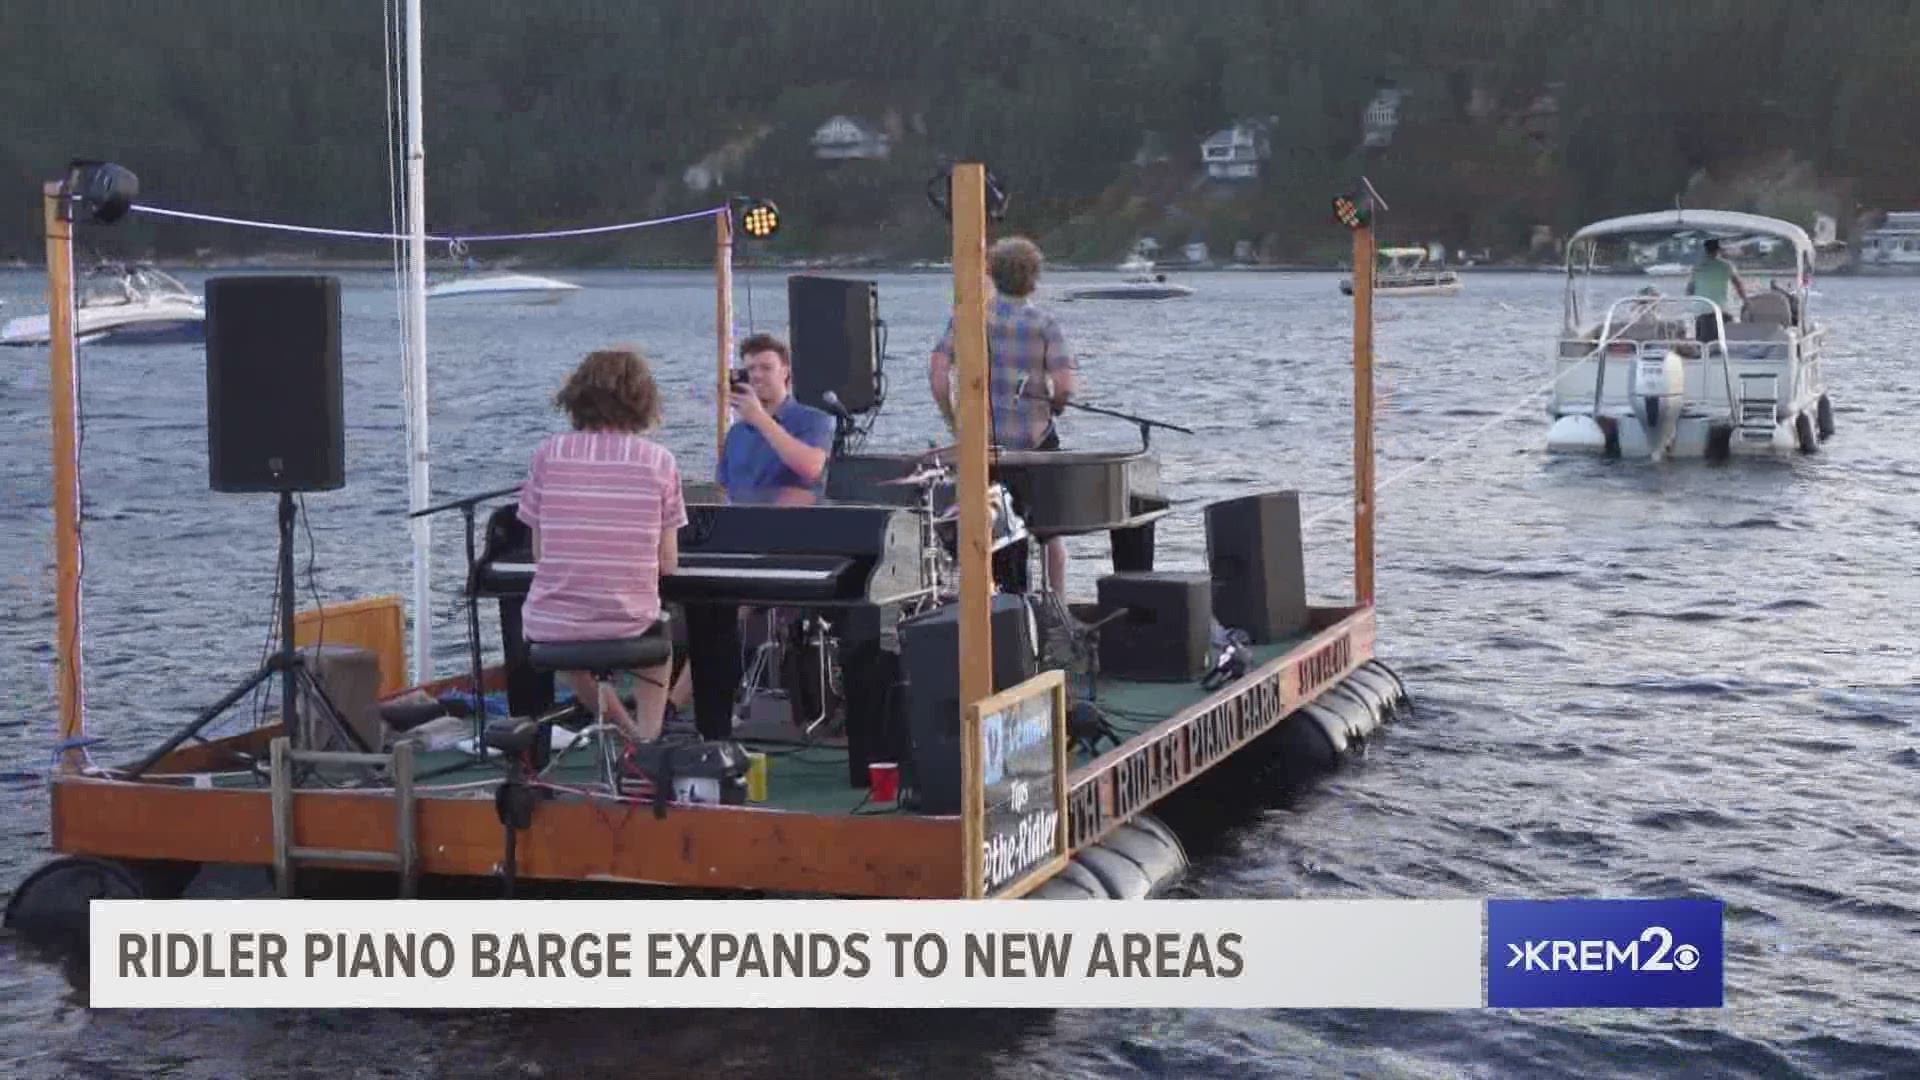 The musicians got creative during the shutdown. They kept the show afloat by performing on a boat on Deer Lake.